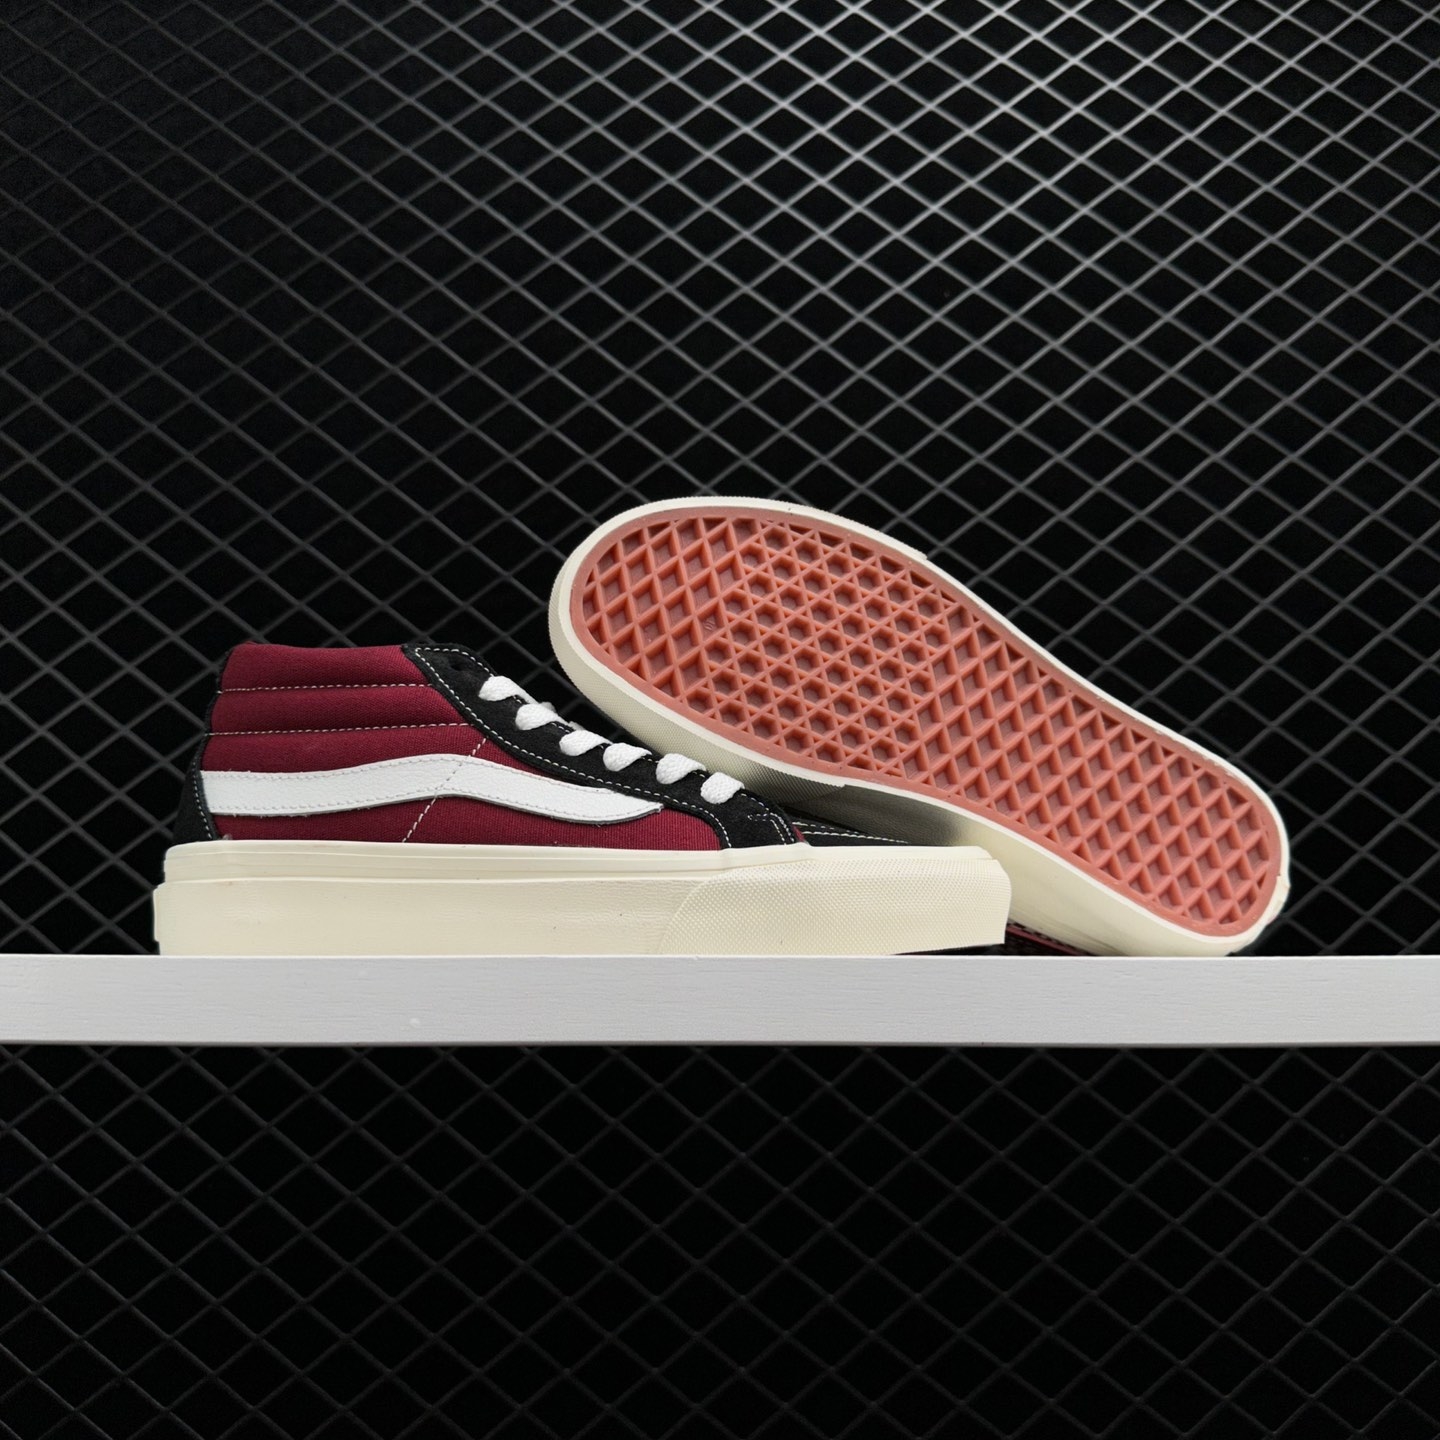 Vans SK8-HI 'P&C' Black Red VN0A4U3CWT9: Stylish High Tops with a Bold Colorway